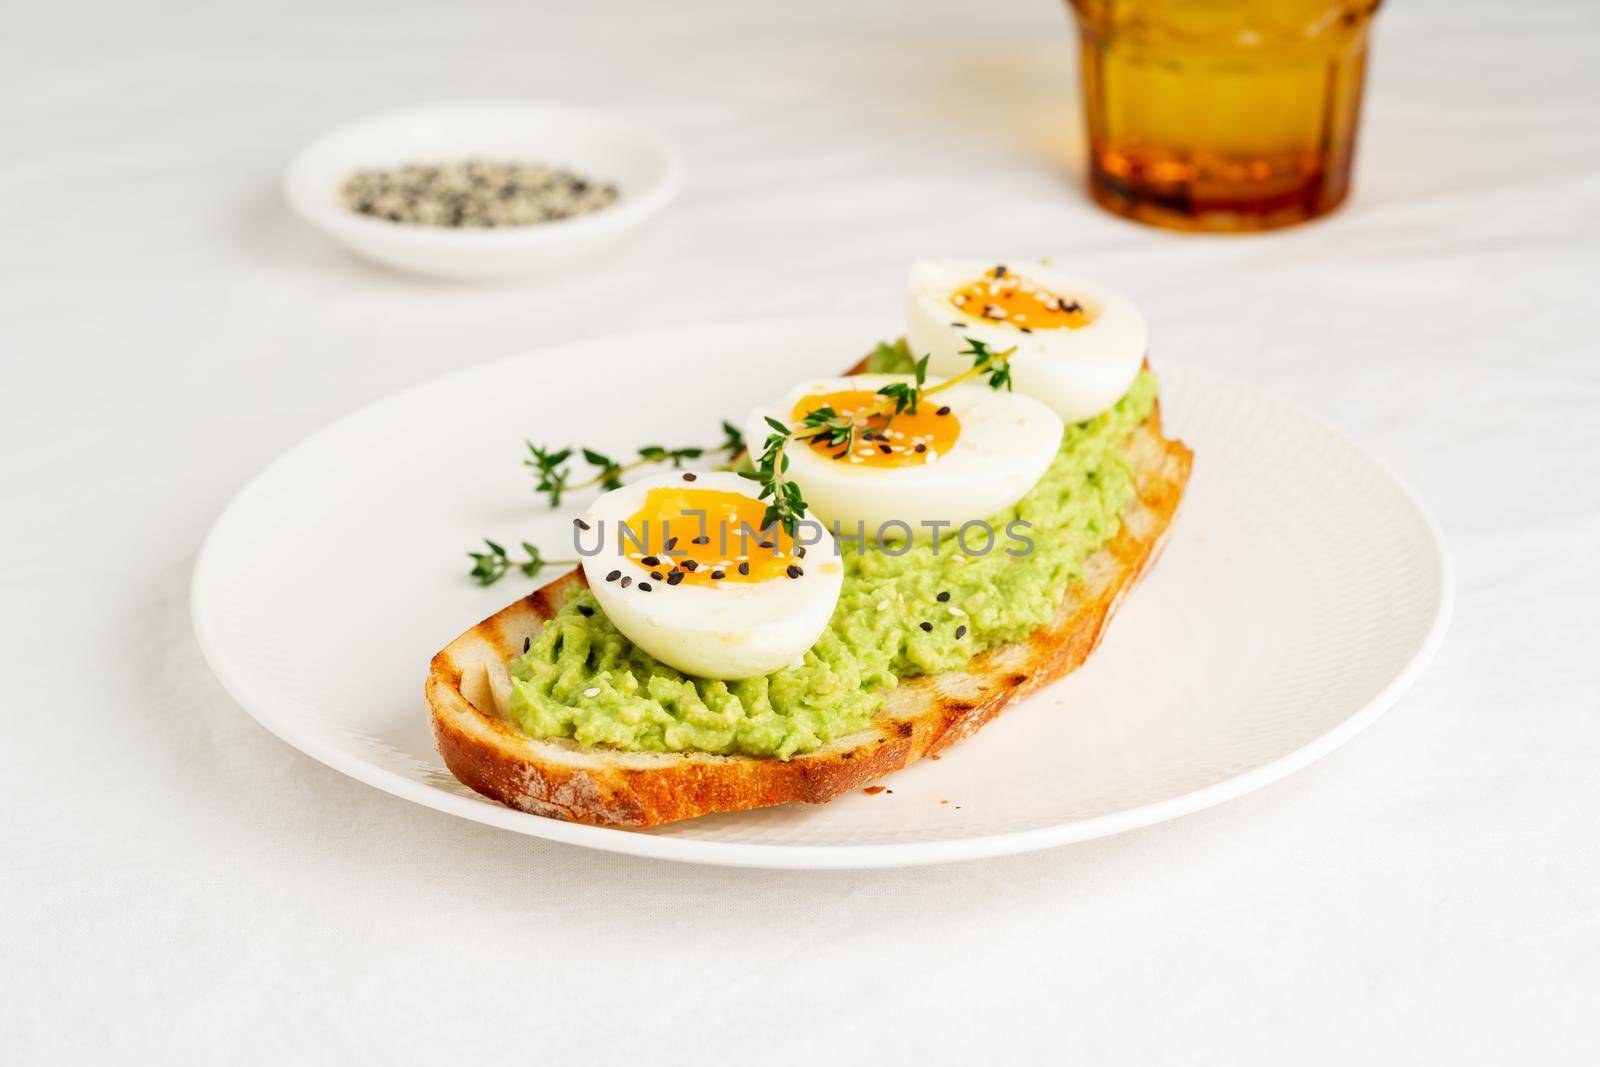 Avocado toast with toasted bread soft-boiled eggs with herbs by NataBene